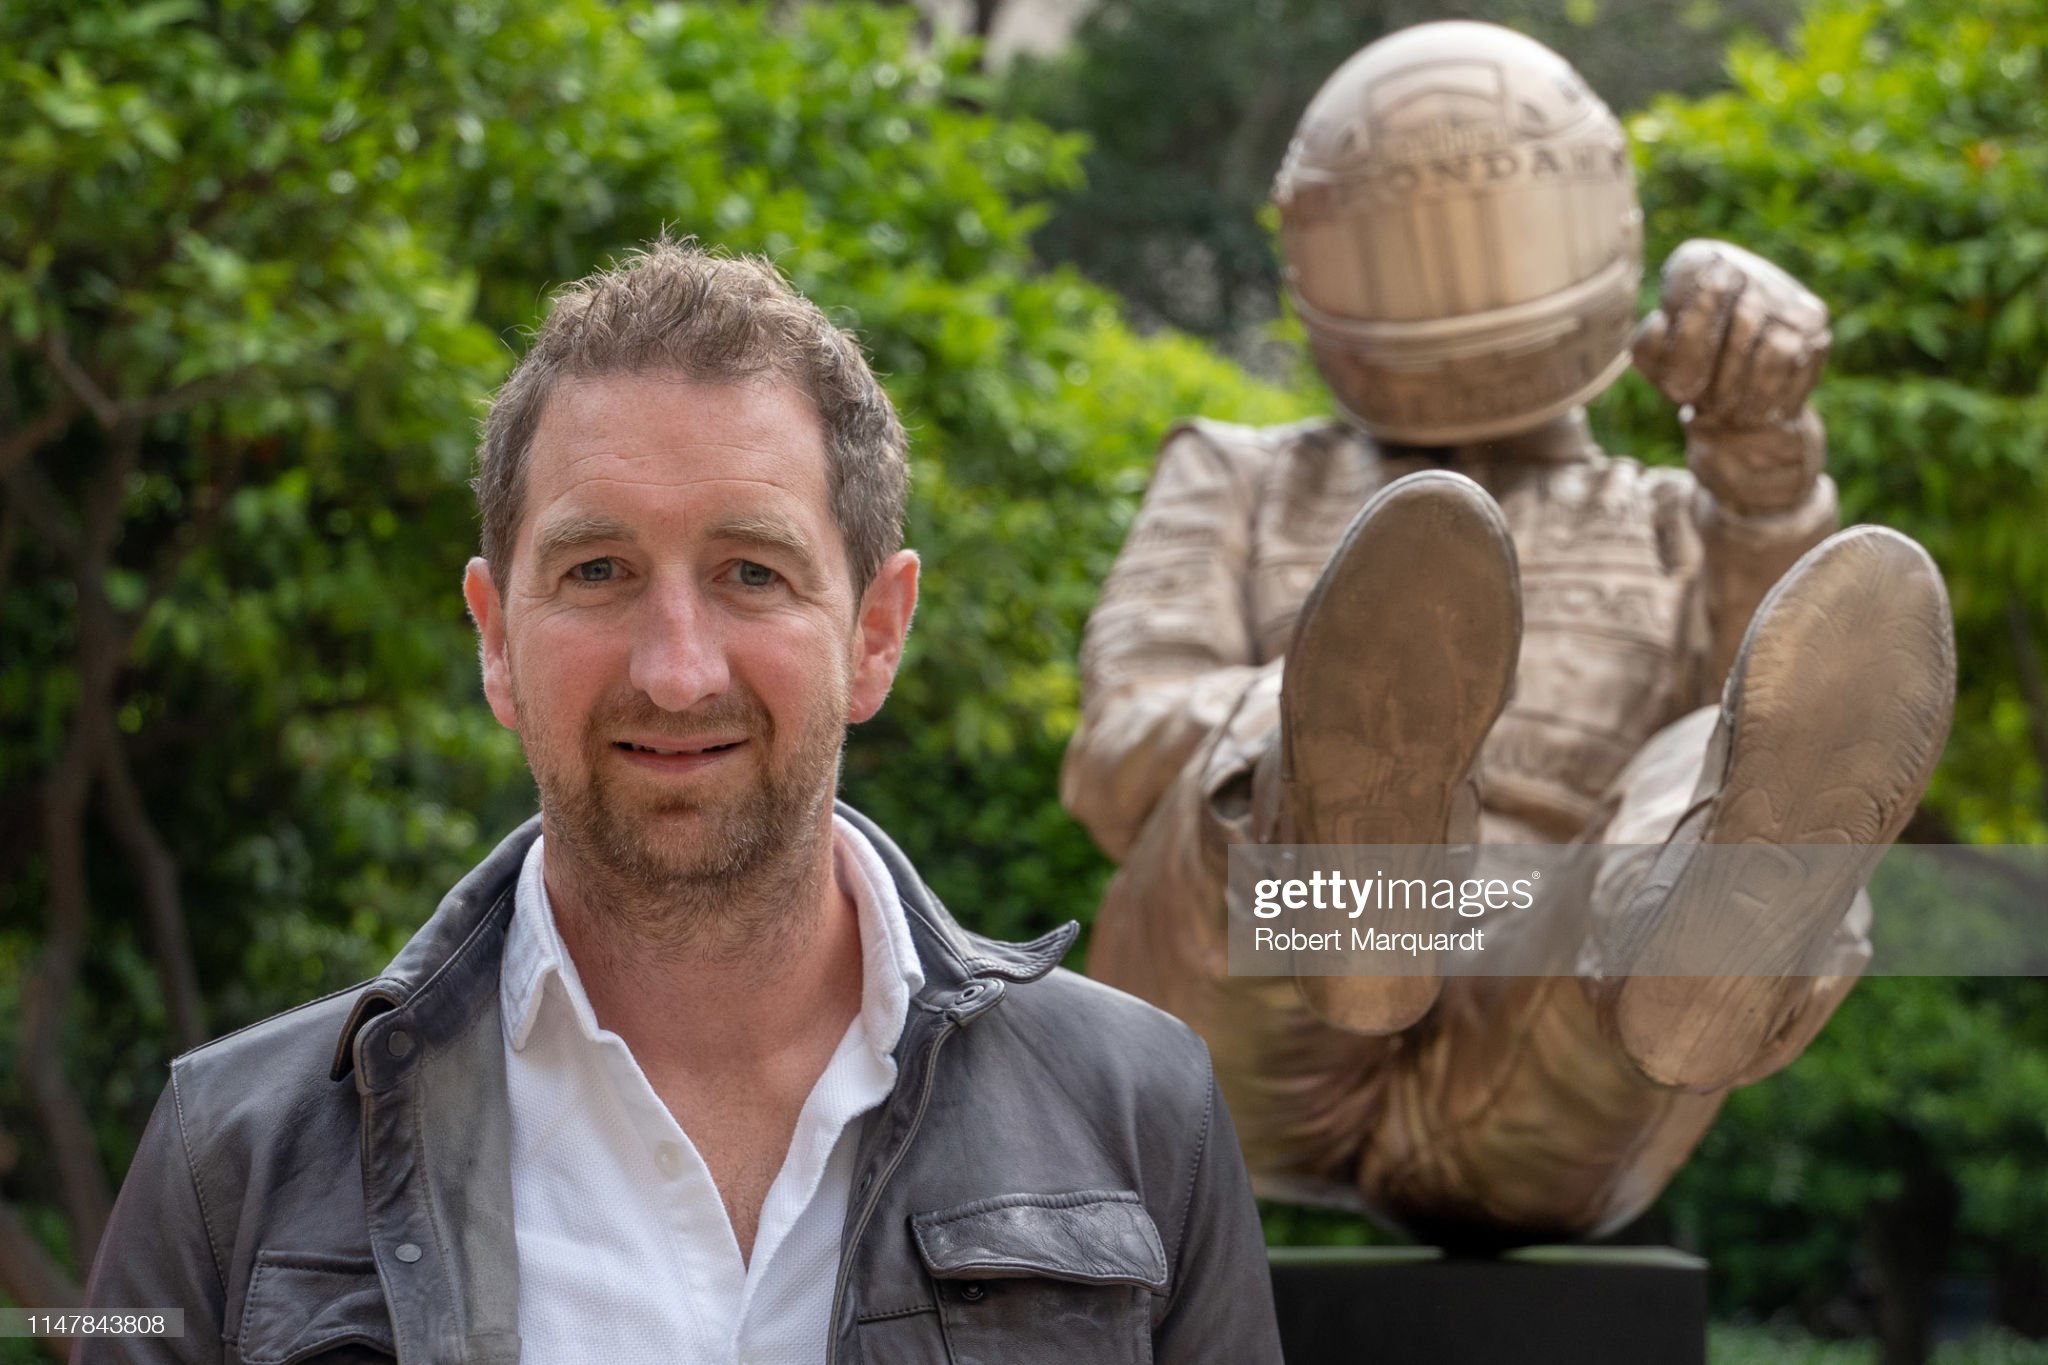 Sculptor Paul Oz attends a Ayrton Senna's sculpture tribute inauguration on the 25th anniversary of his death on May 08, 2019 in Barcelona, Spain.